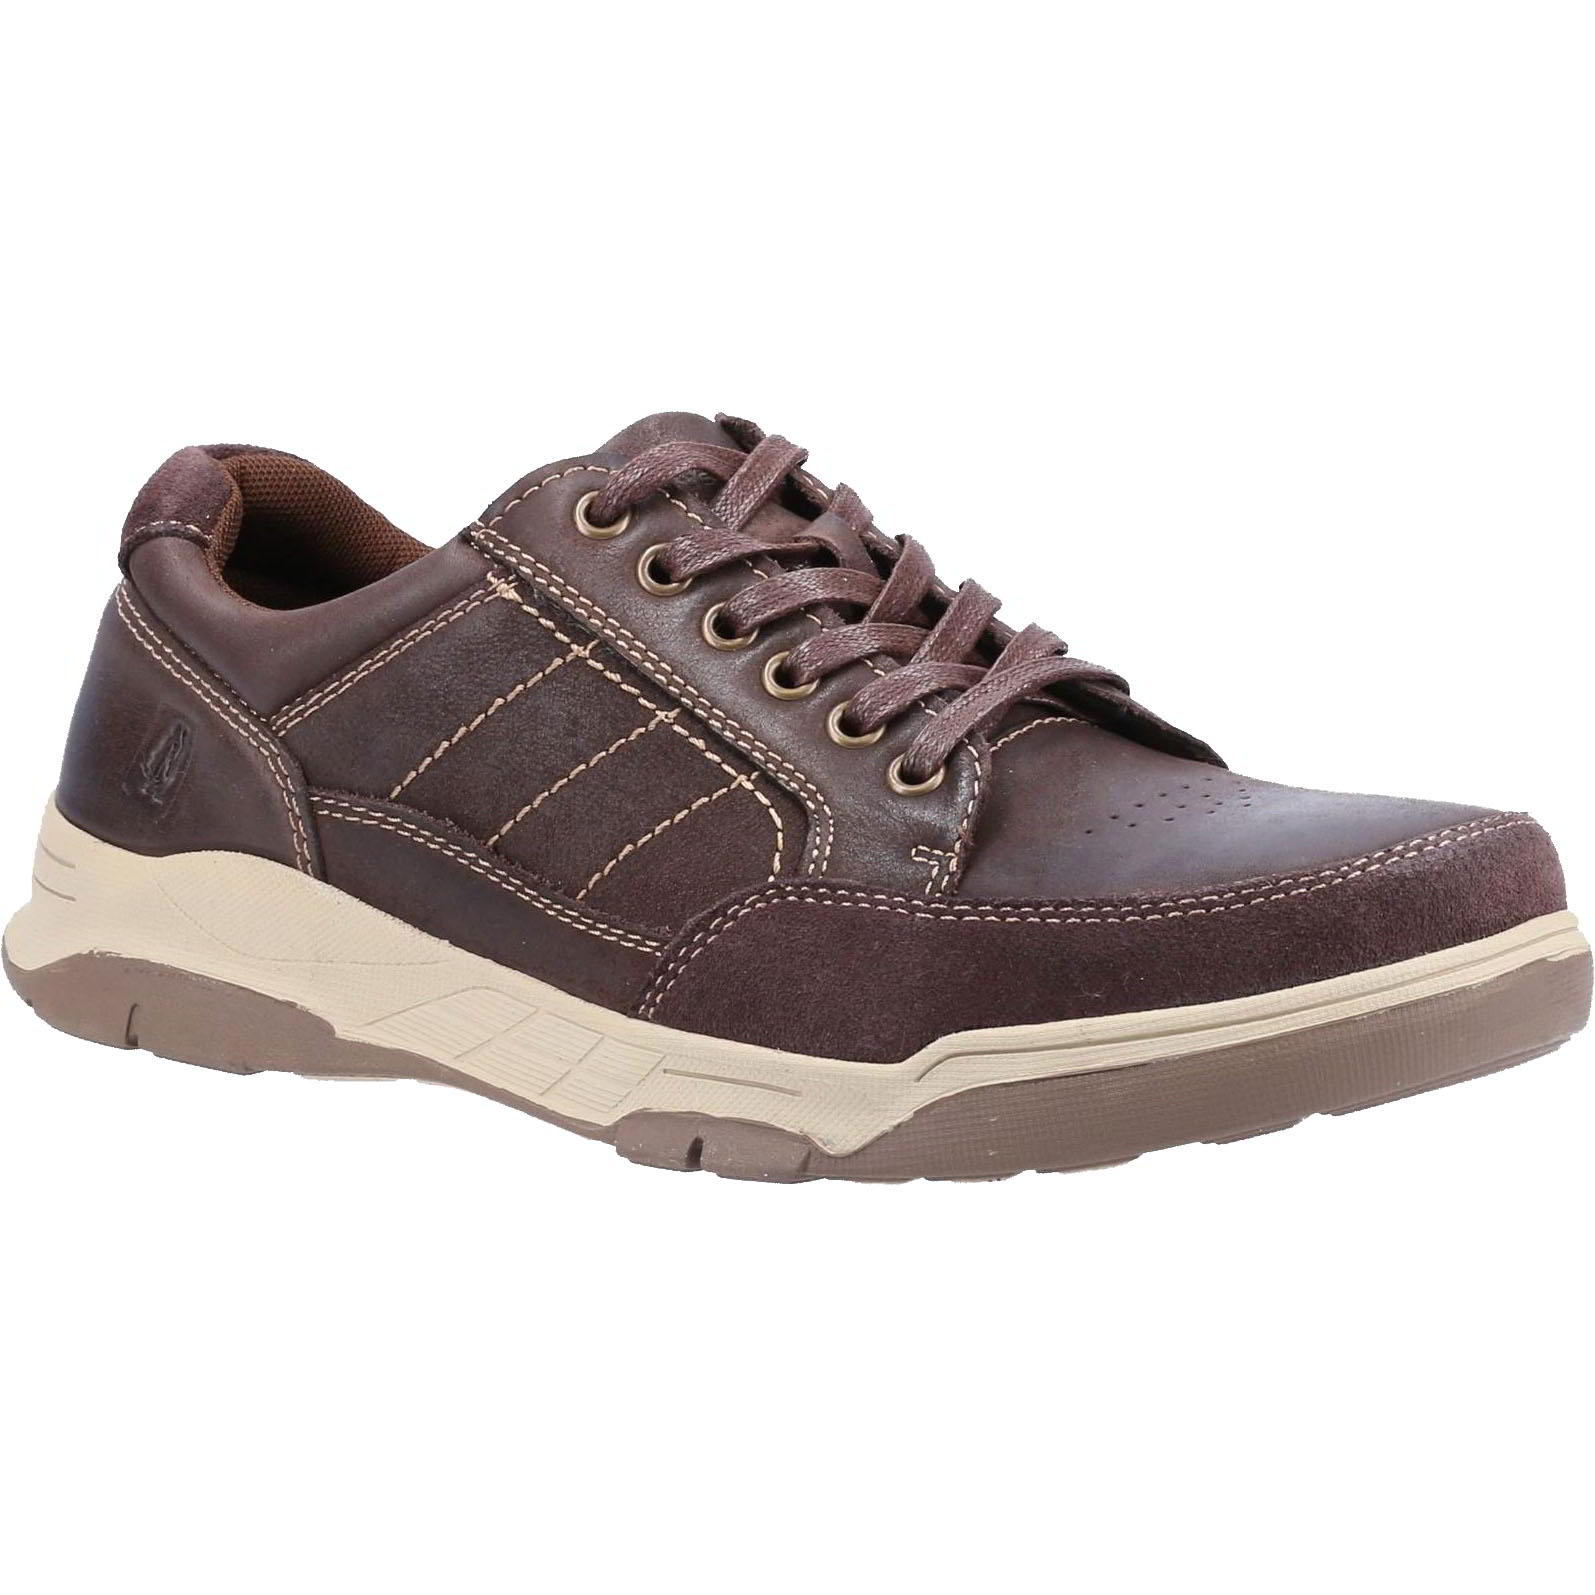 Hush Puppies Men's Finley Wide Fit Shoes Trainers - UK 11